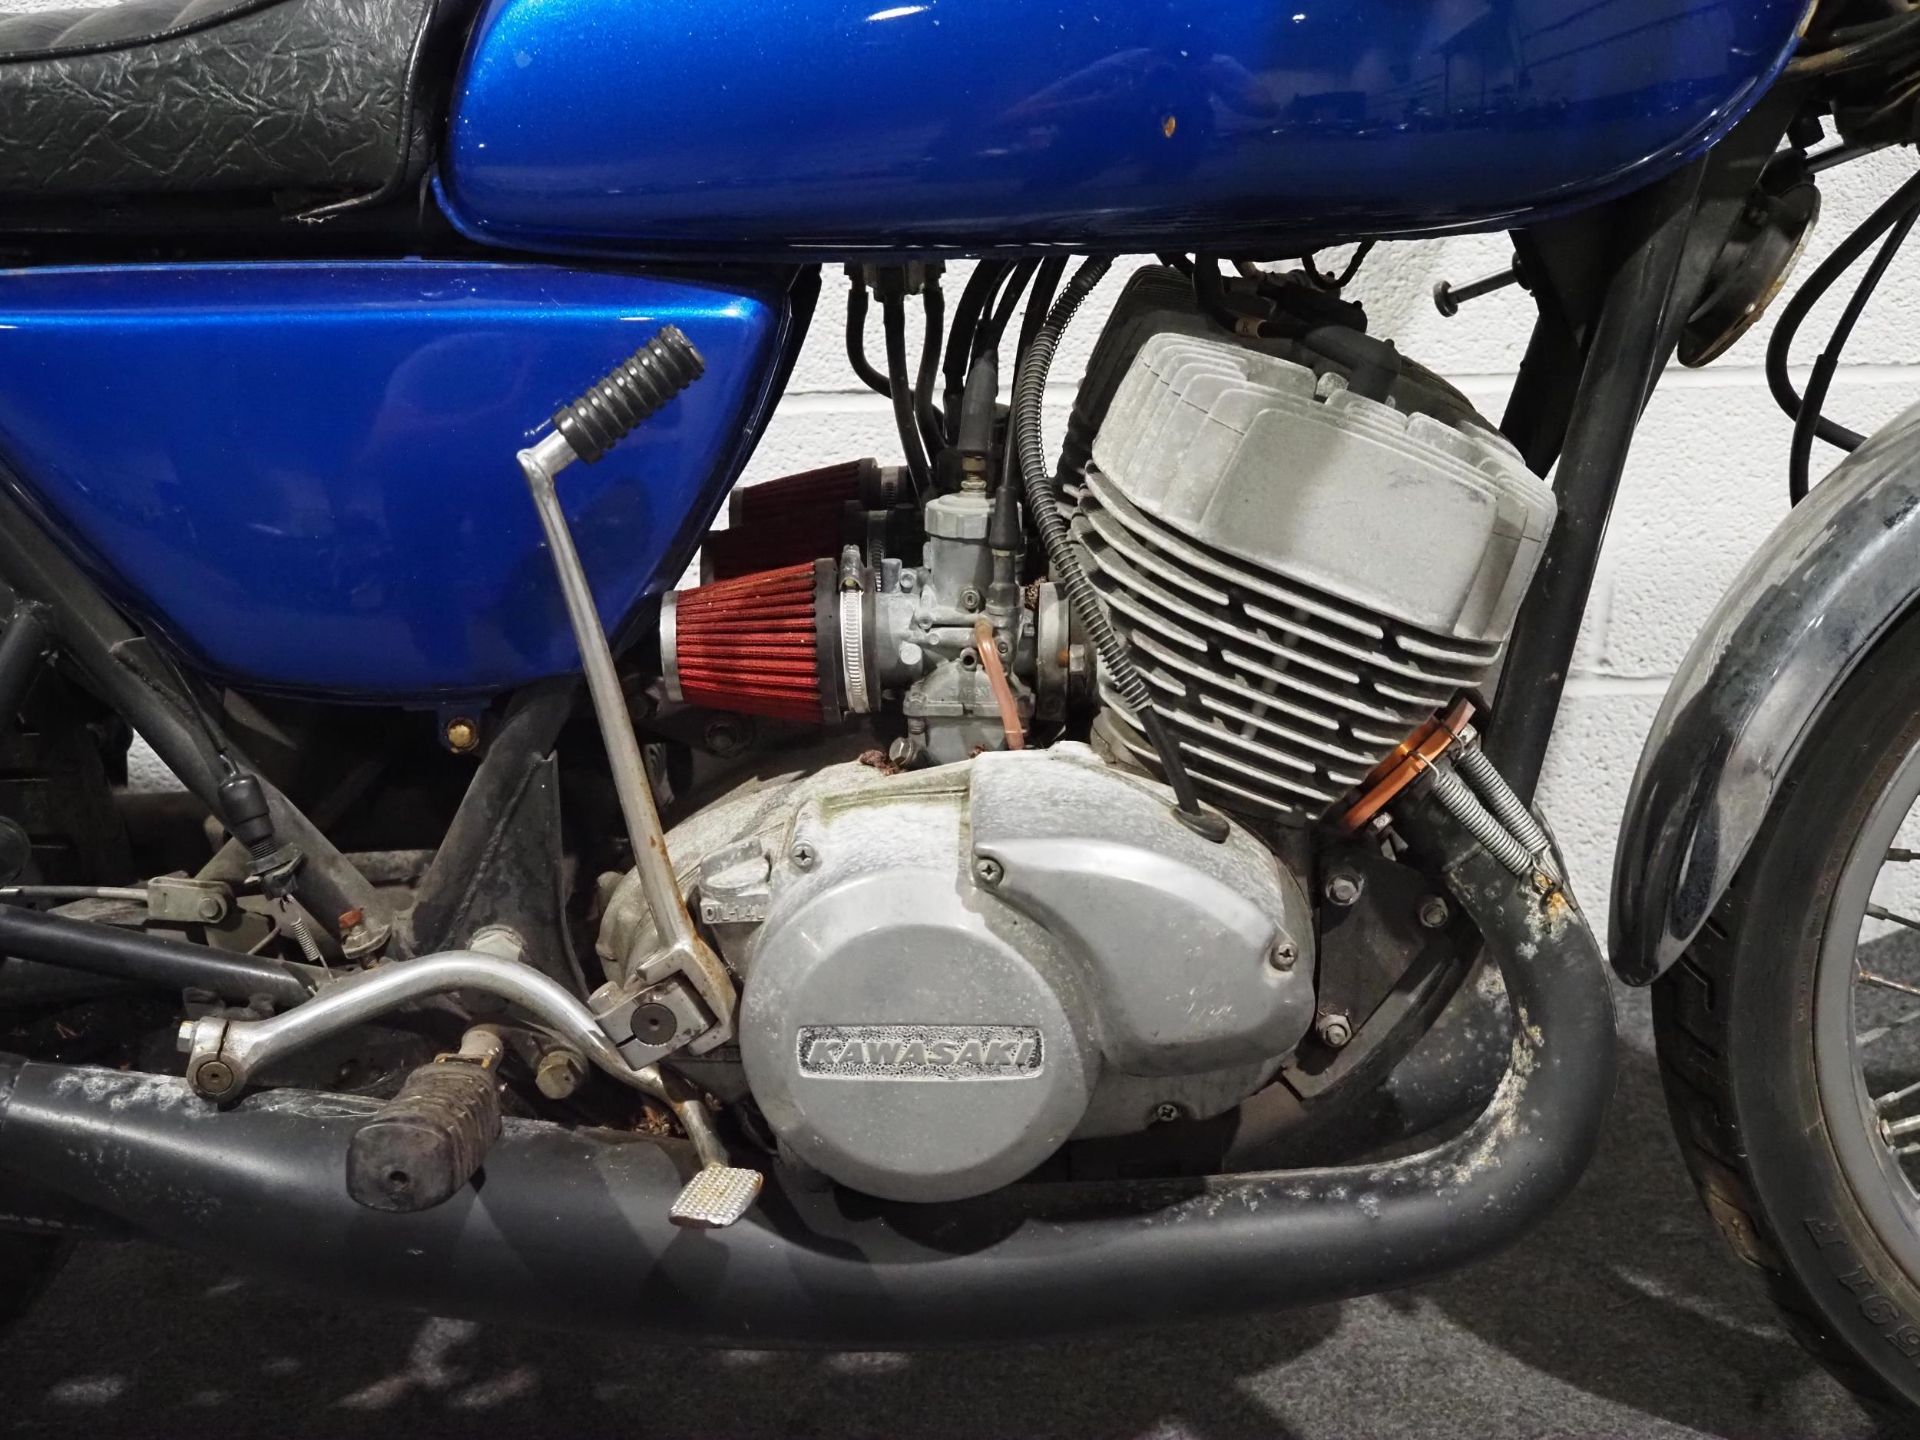 Kawasaki H2 motorcycle, 1975, 750cc Frame no. H2F44394 Engine no. H2E44691 From a deceased estate, - Image 4 of 6